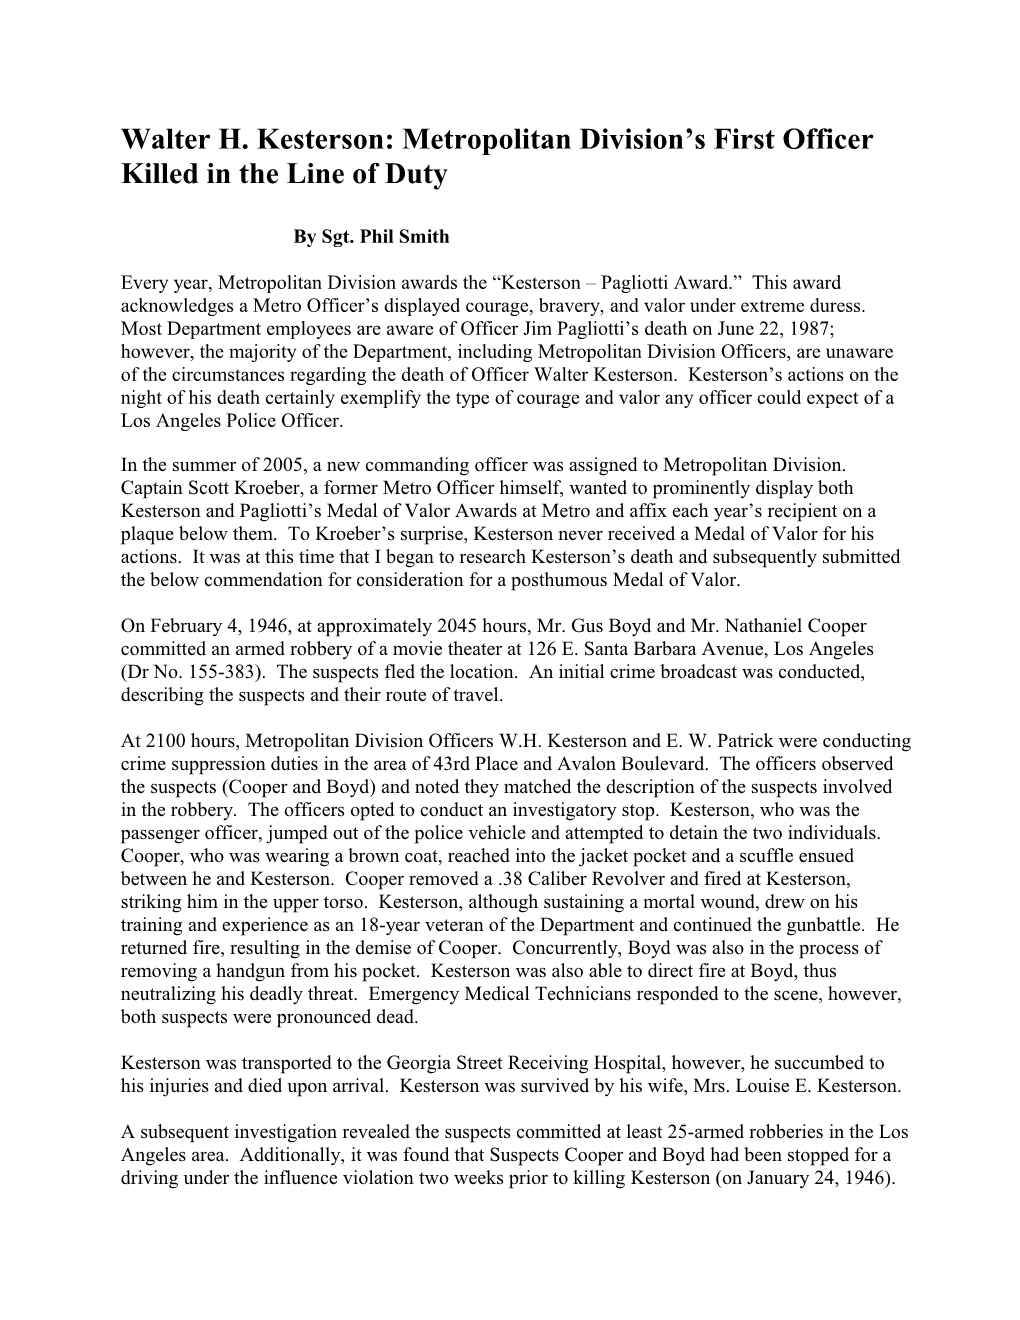 Walter H. Kesterson: Metropolitan Division S First Officer Killed in the Line of Duty